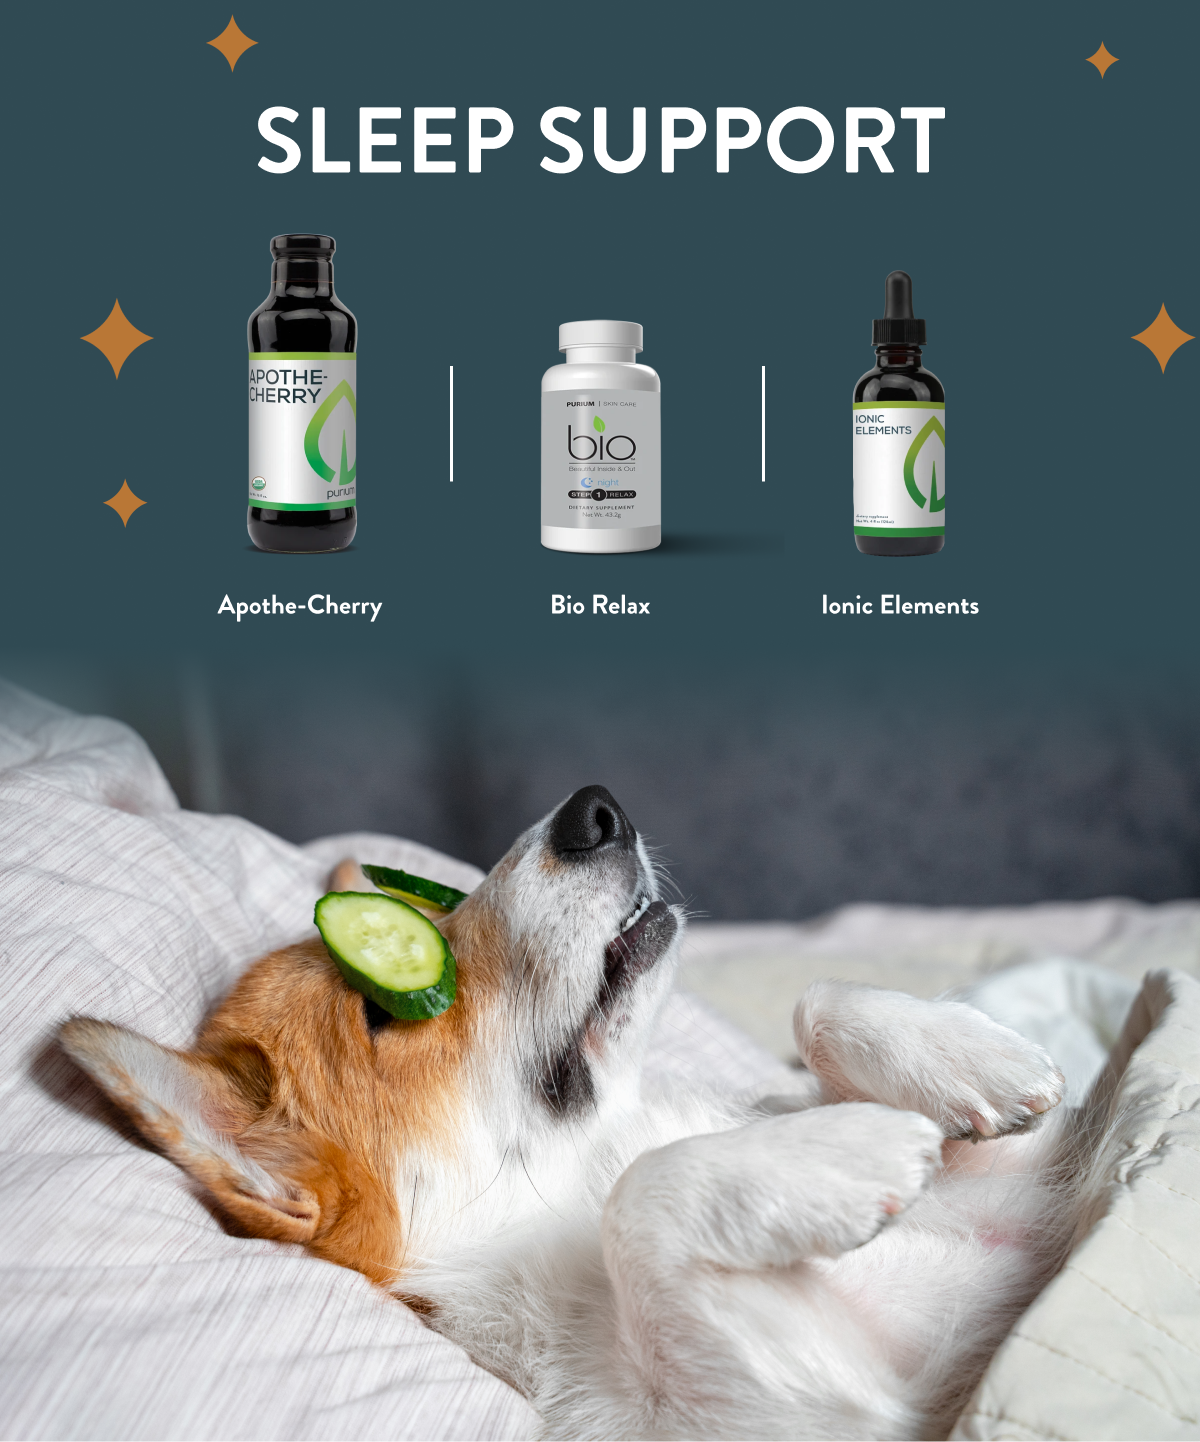 Support a Better Night’s Sleep with Purium